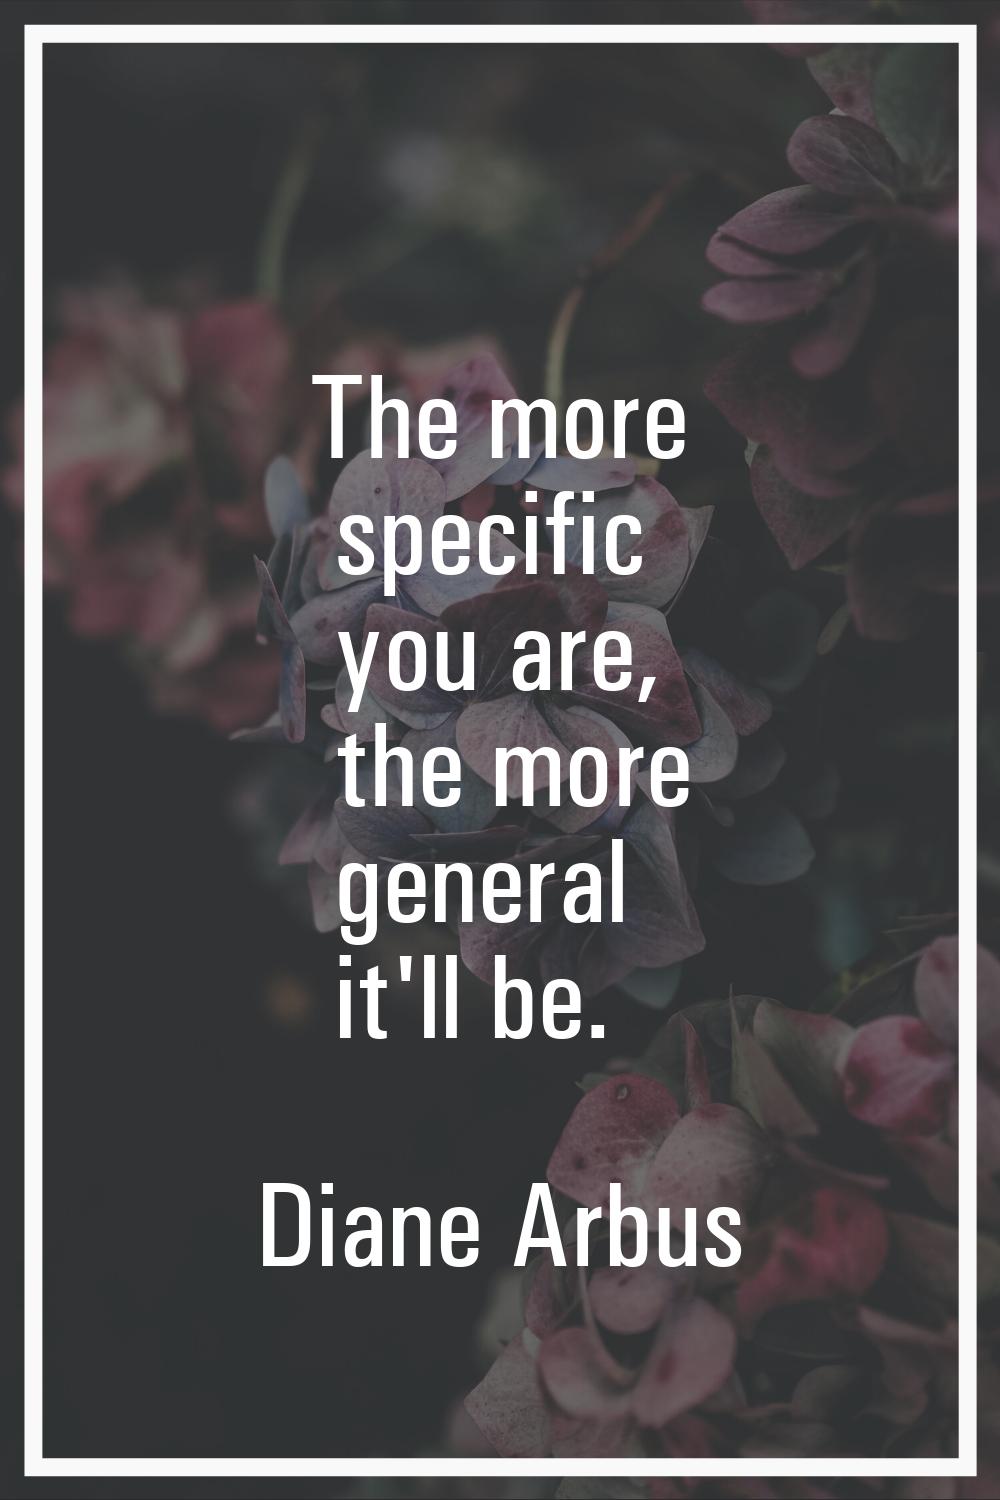 The more specific you are, the more general it'll be.